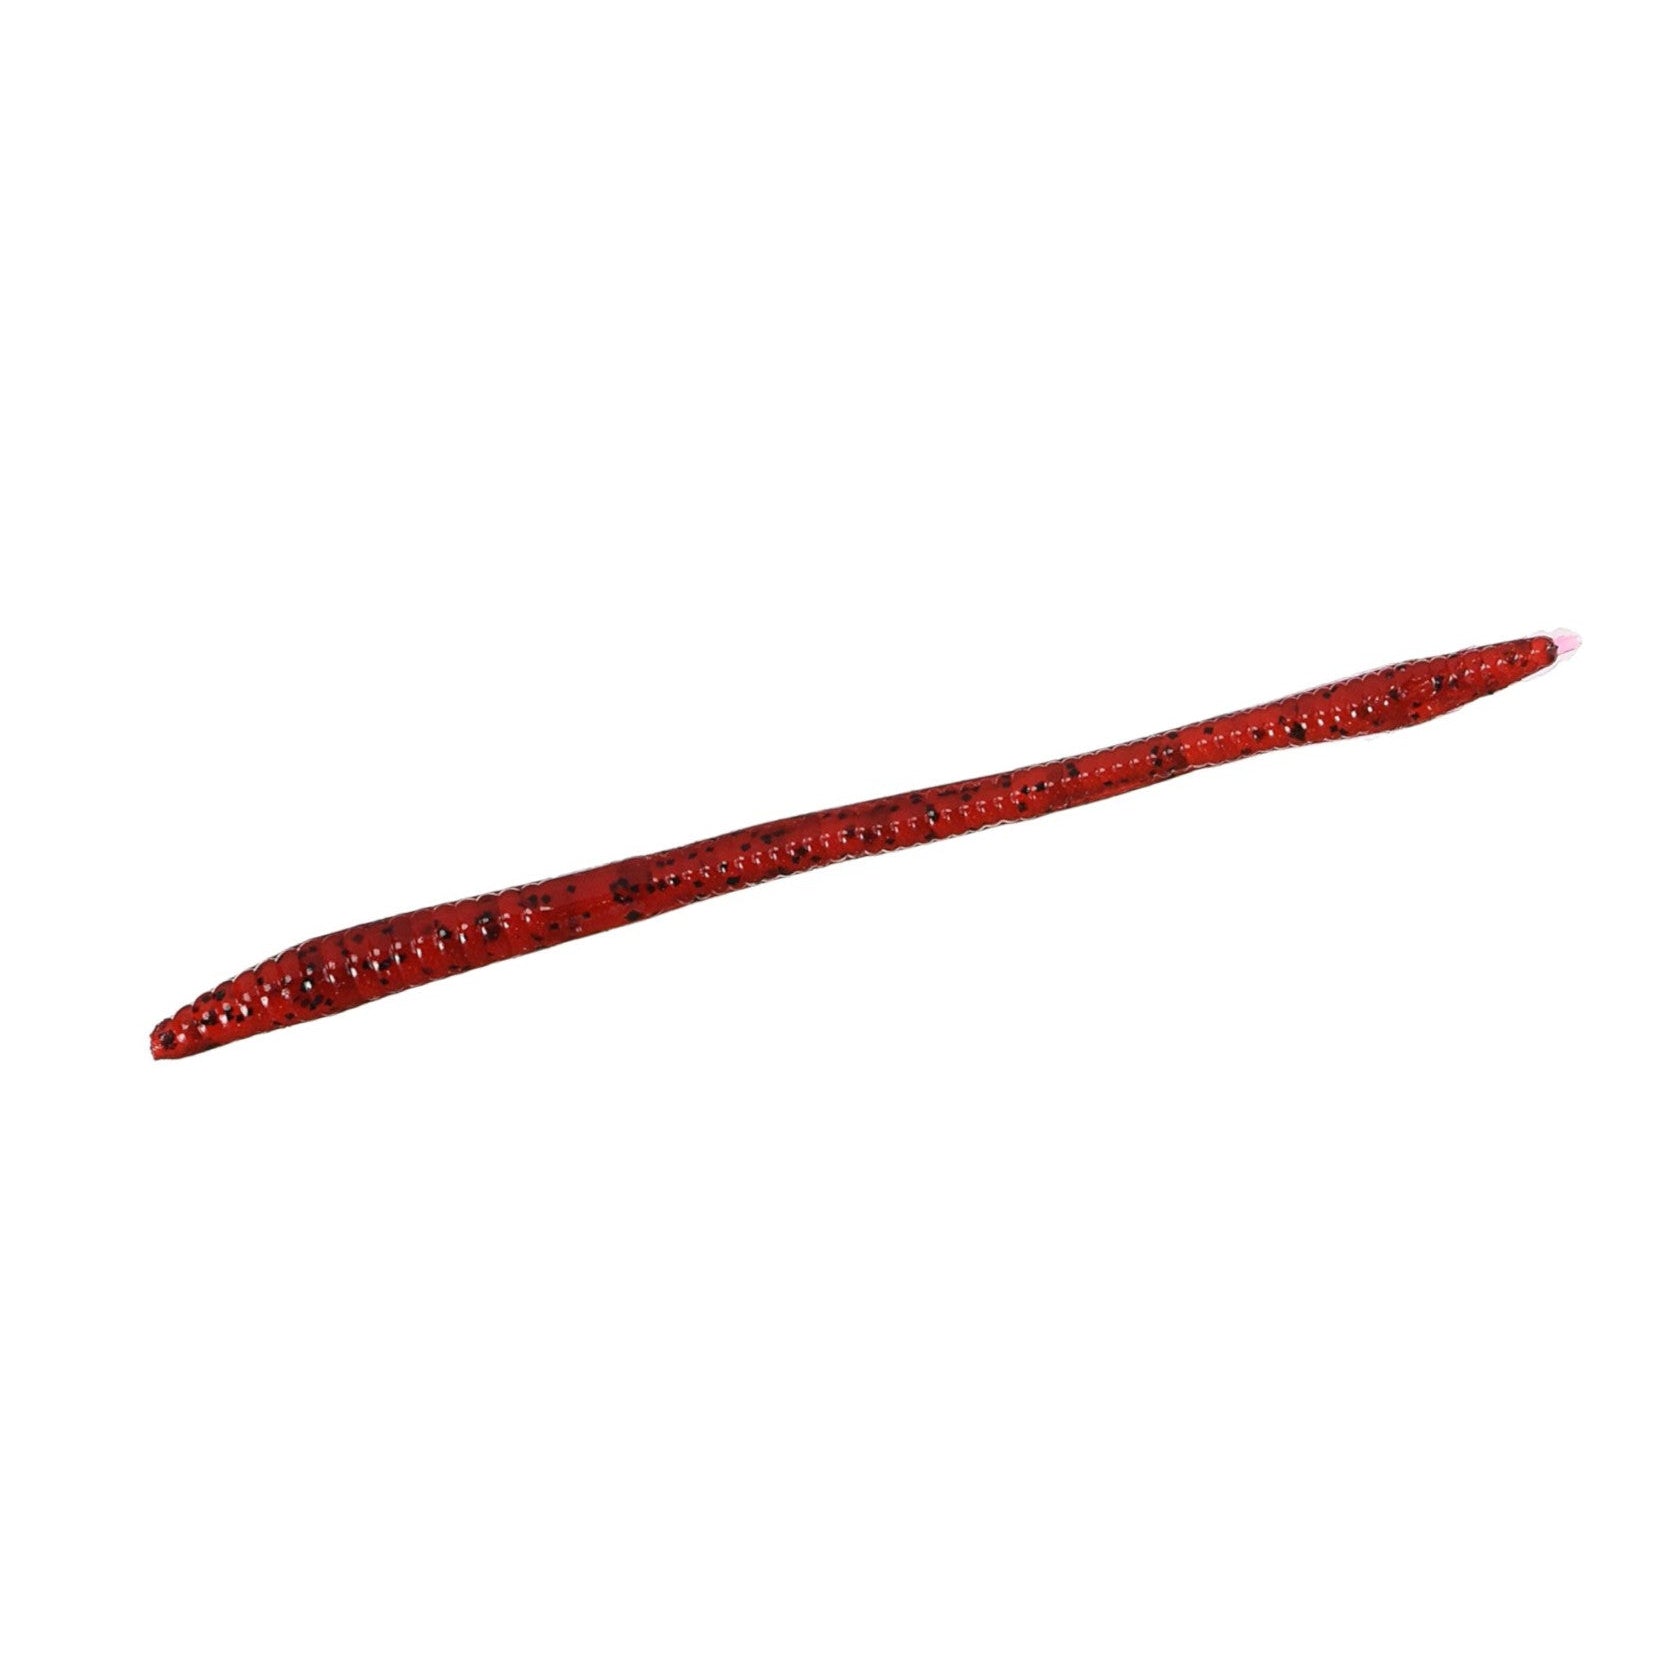 Zoom Trick Worm 6 1/2 inch Soft Plastic Worm 20 pack, Kentackle